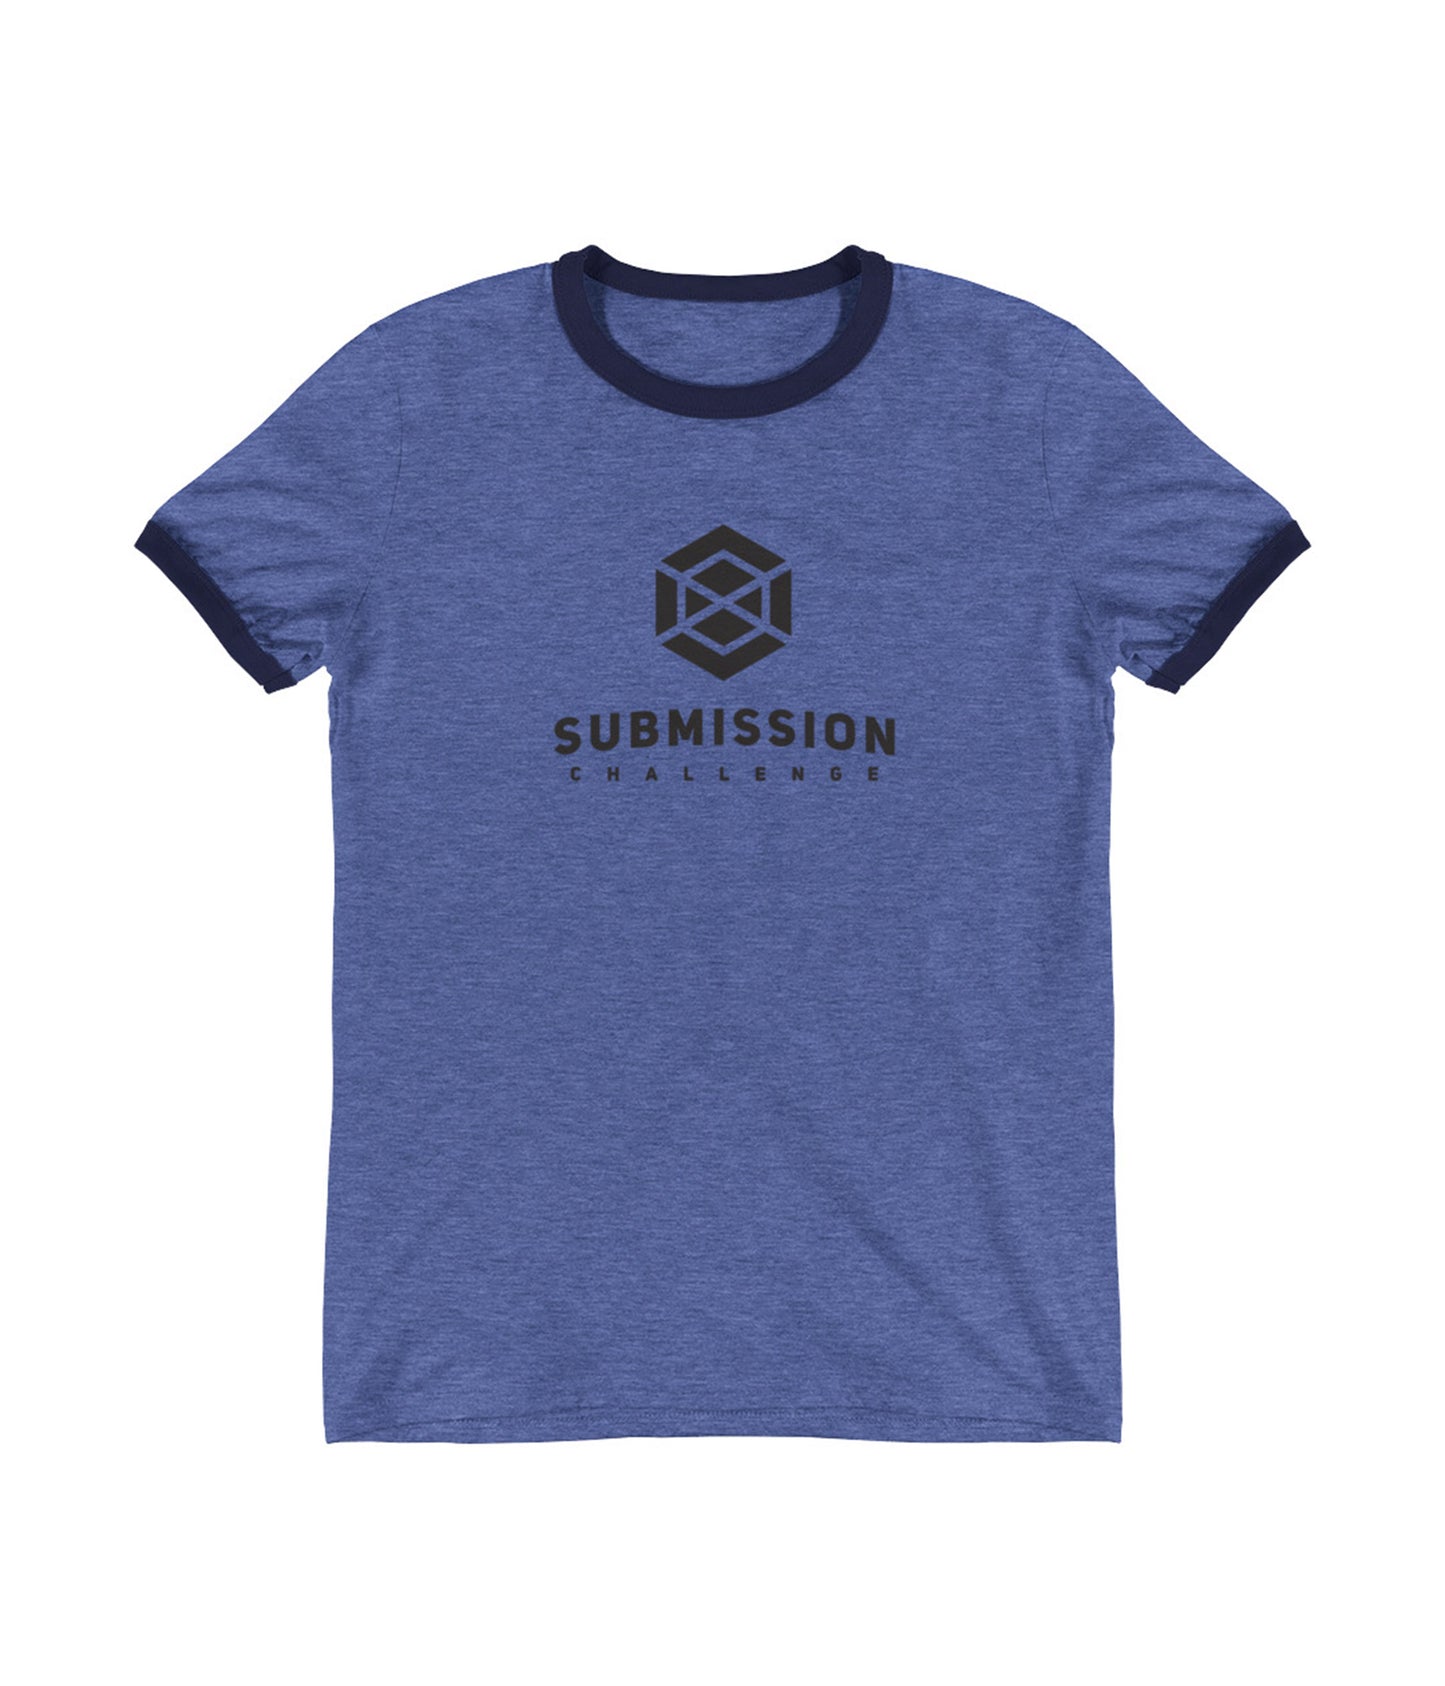 Submission Challenge Ringer Tee